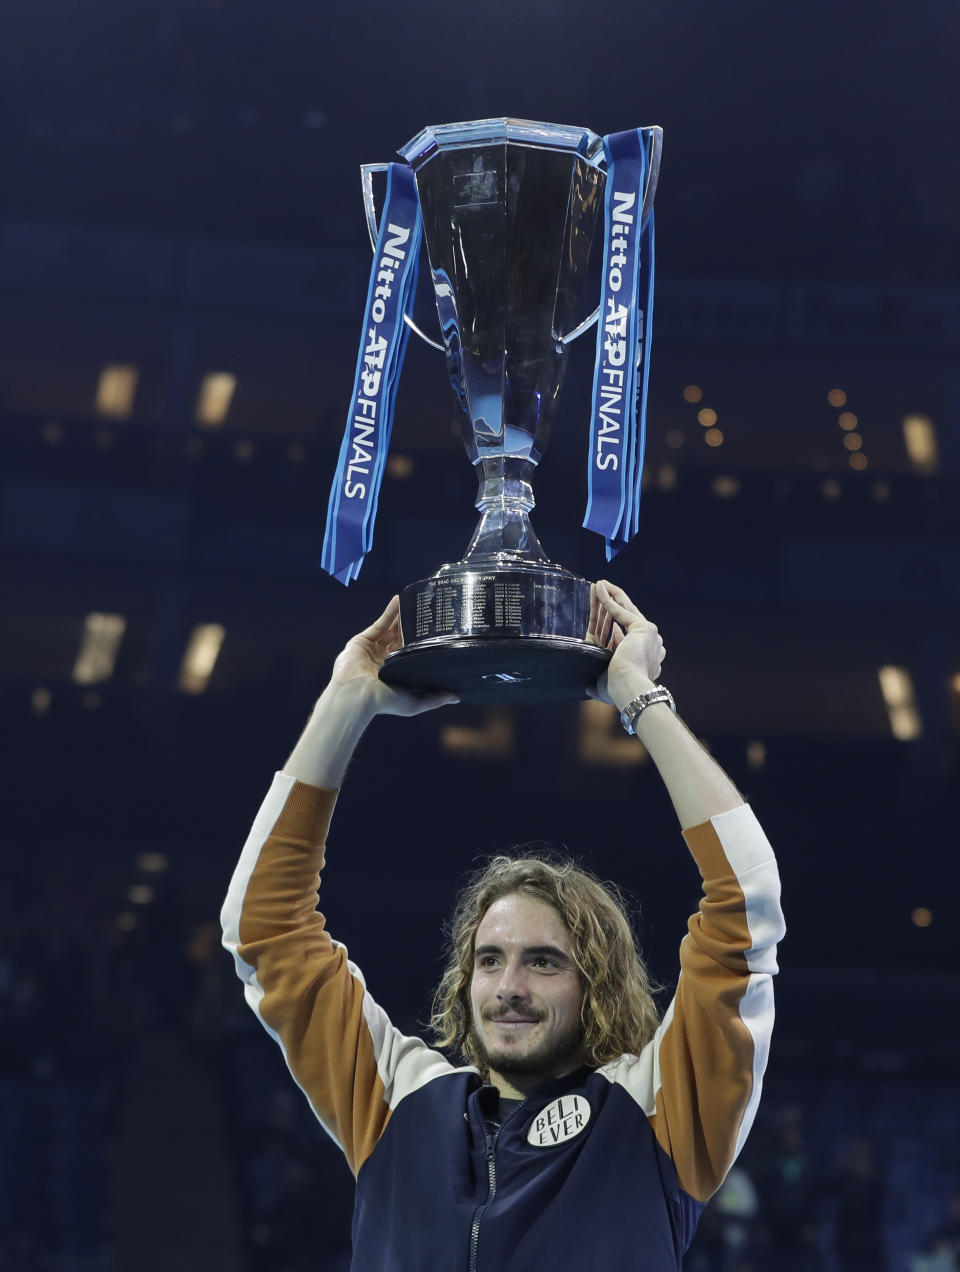 Stefanos Tsitsipas of Greece holds up the trophy and celebrates after defeating Austria's Dominic Thiem in the final of the ATP World Finals tennis match at the O2 arena in London, Sunday, Nov. 17, 2019. (AP Photo/Kirsty Wigglesworth)